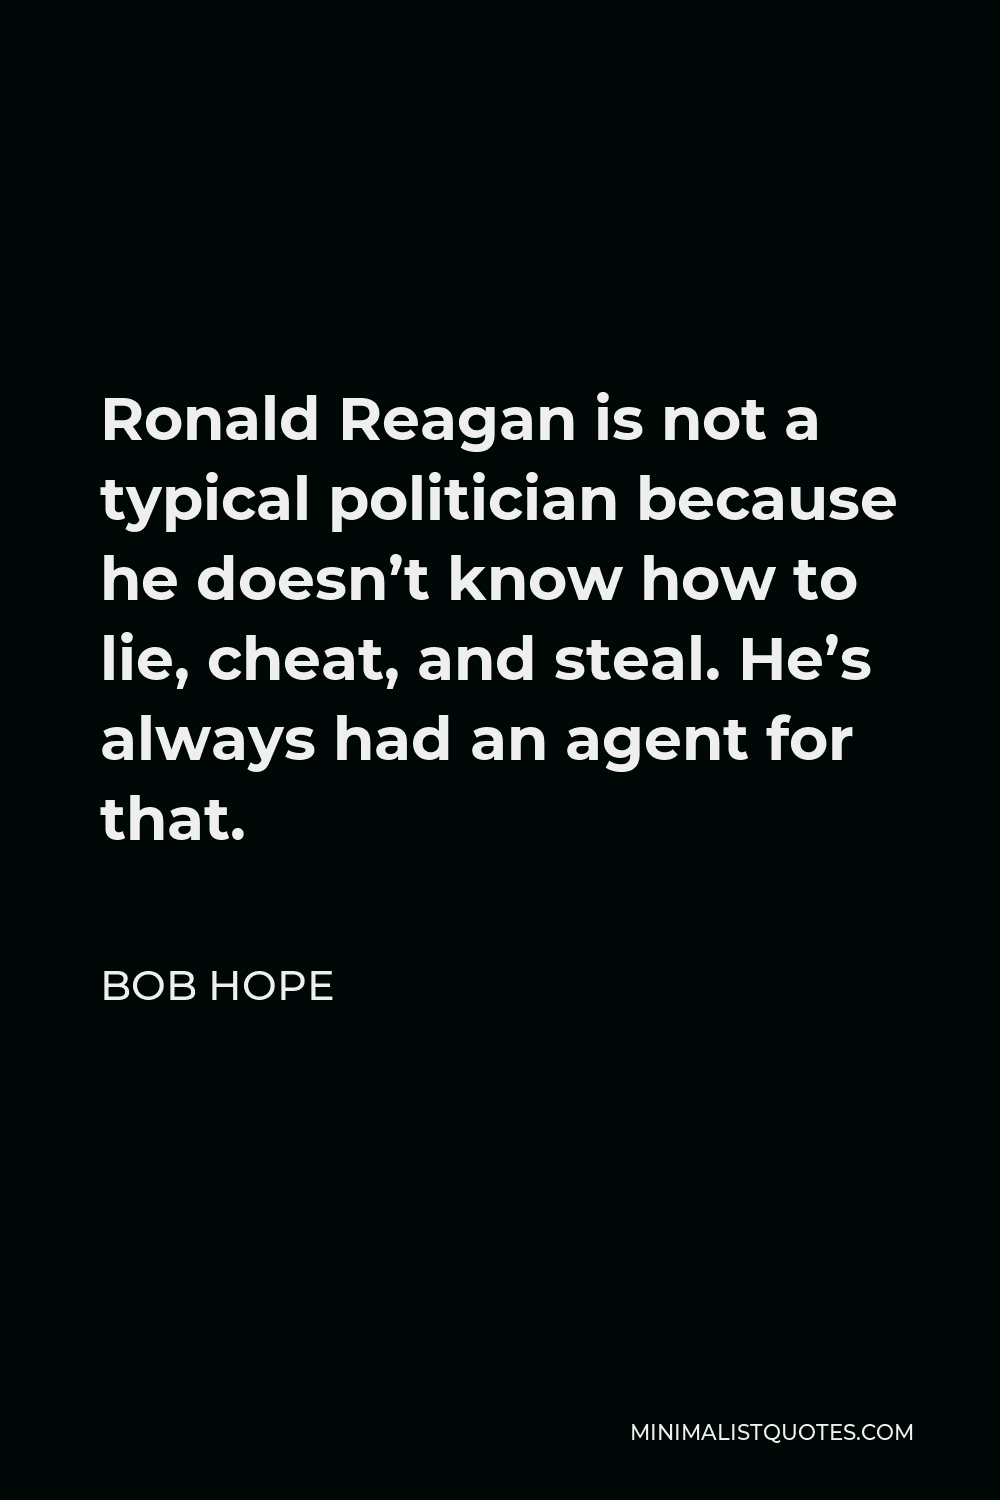 Bob Hope Quote - Ronald Reagan is not a typical politician because he doesn’t know how to lie, cheat, and steal. He’s always had an agent for that.